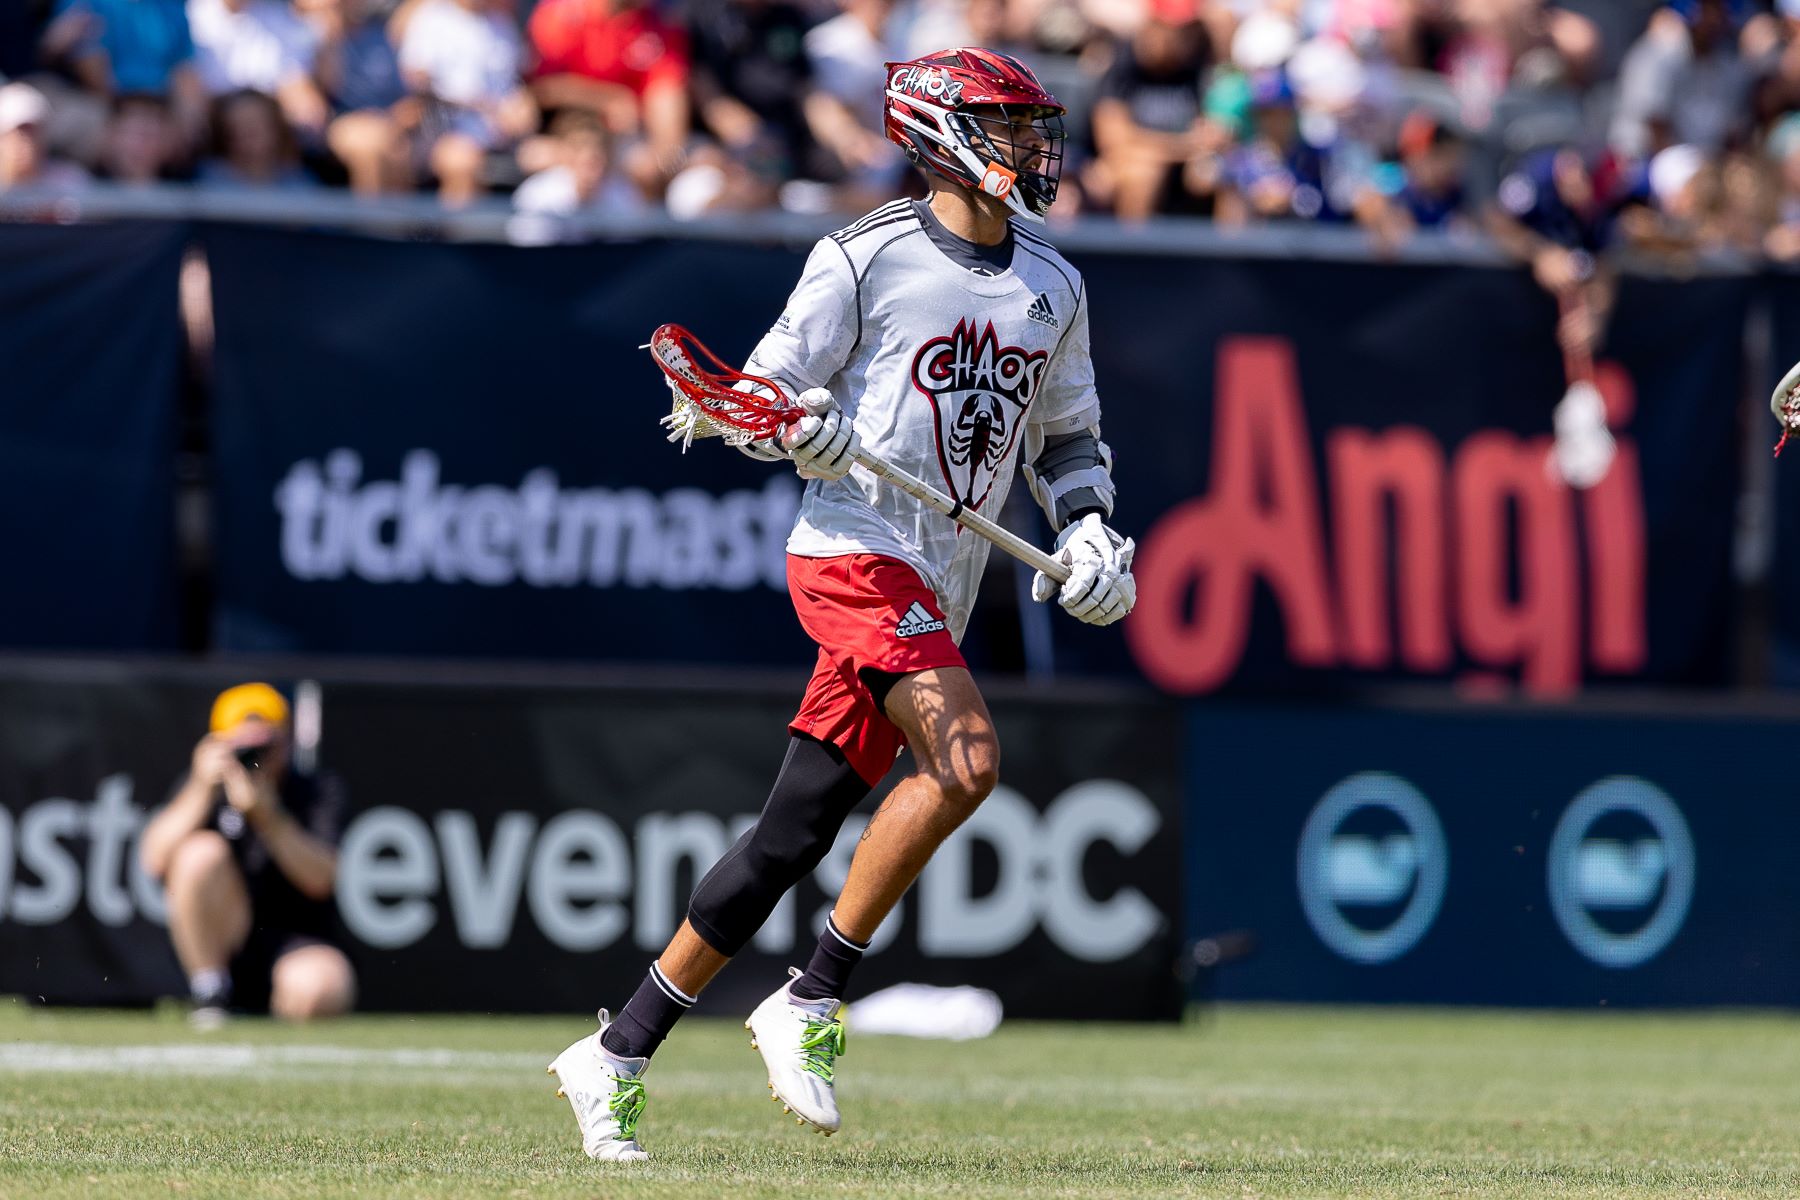 Chaos Midfielder Dhane Smith playing in the Premier Lacrosse League championship game against the Whipsnakes at Audi Field